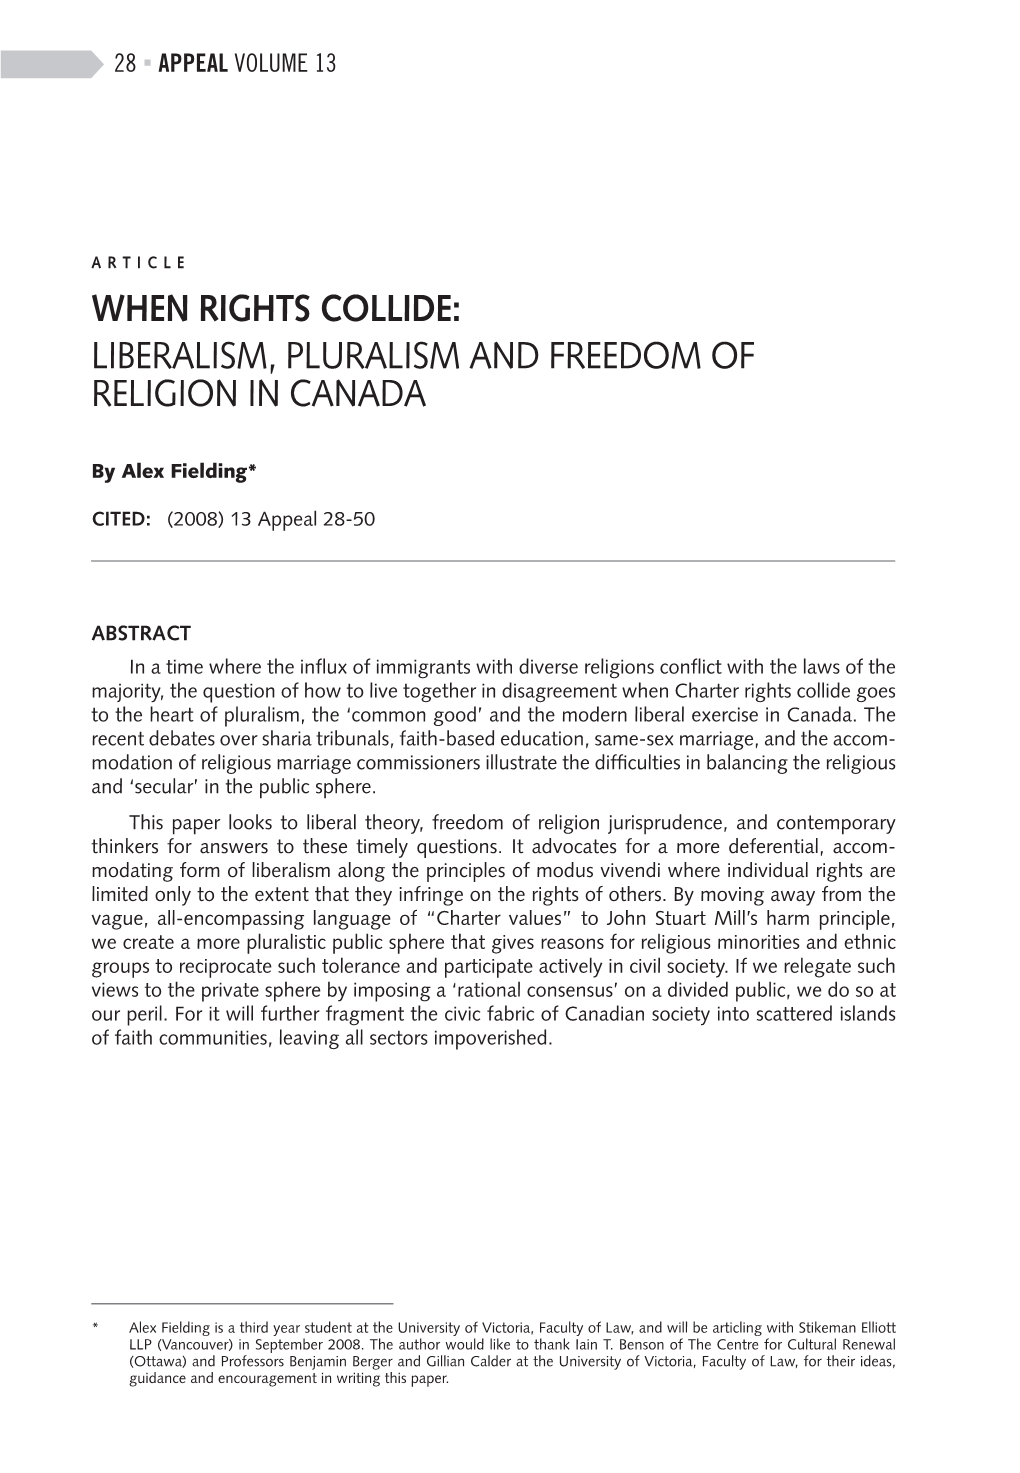 Liberalism, Pluralism and Freedom of Religion in Canada